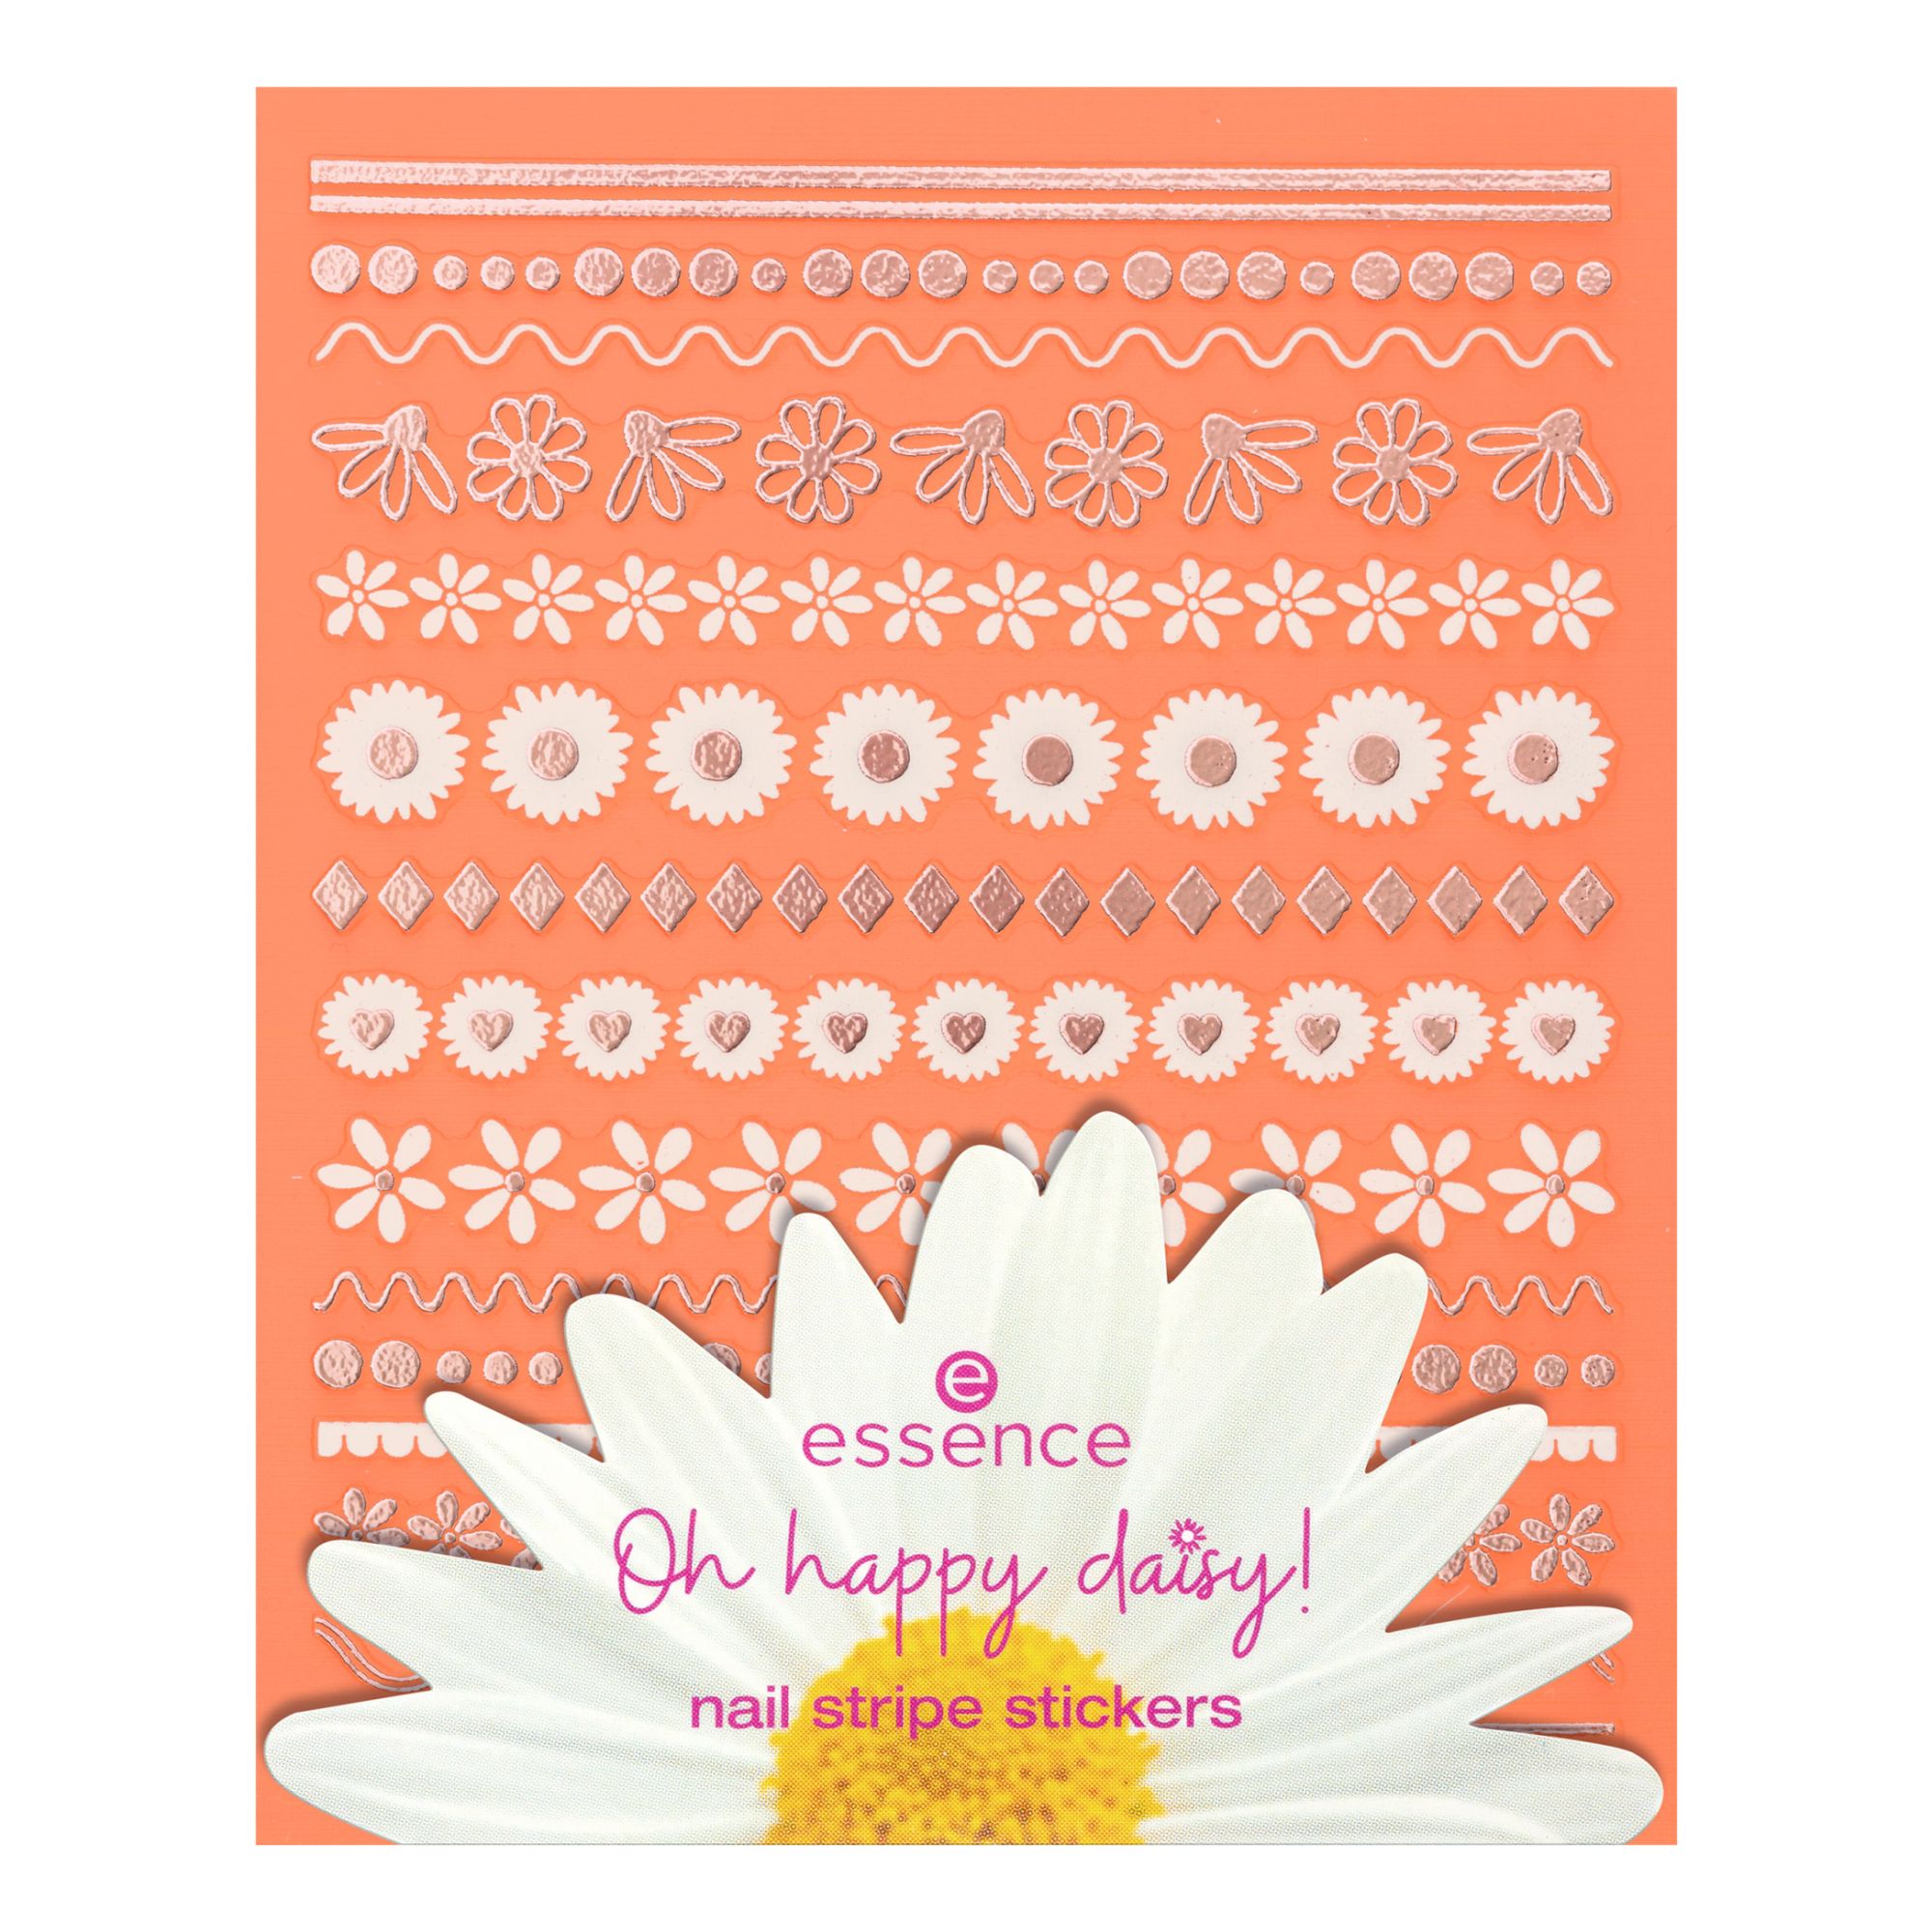 Oh Happy Daisy! - Nail Stripe Stickers (15 Pièces)